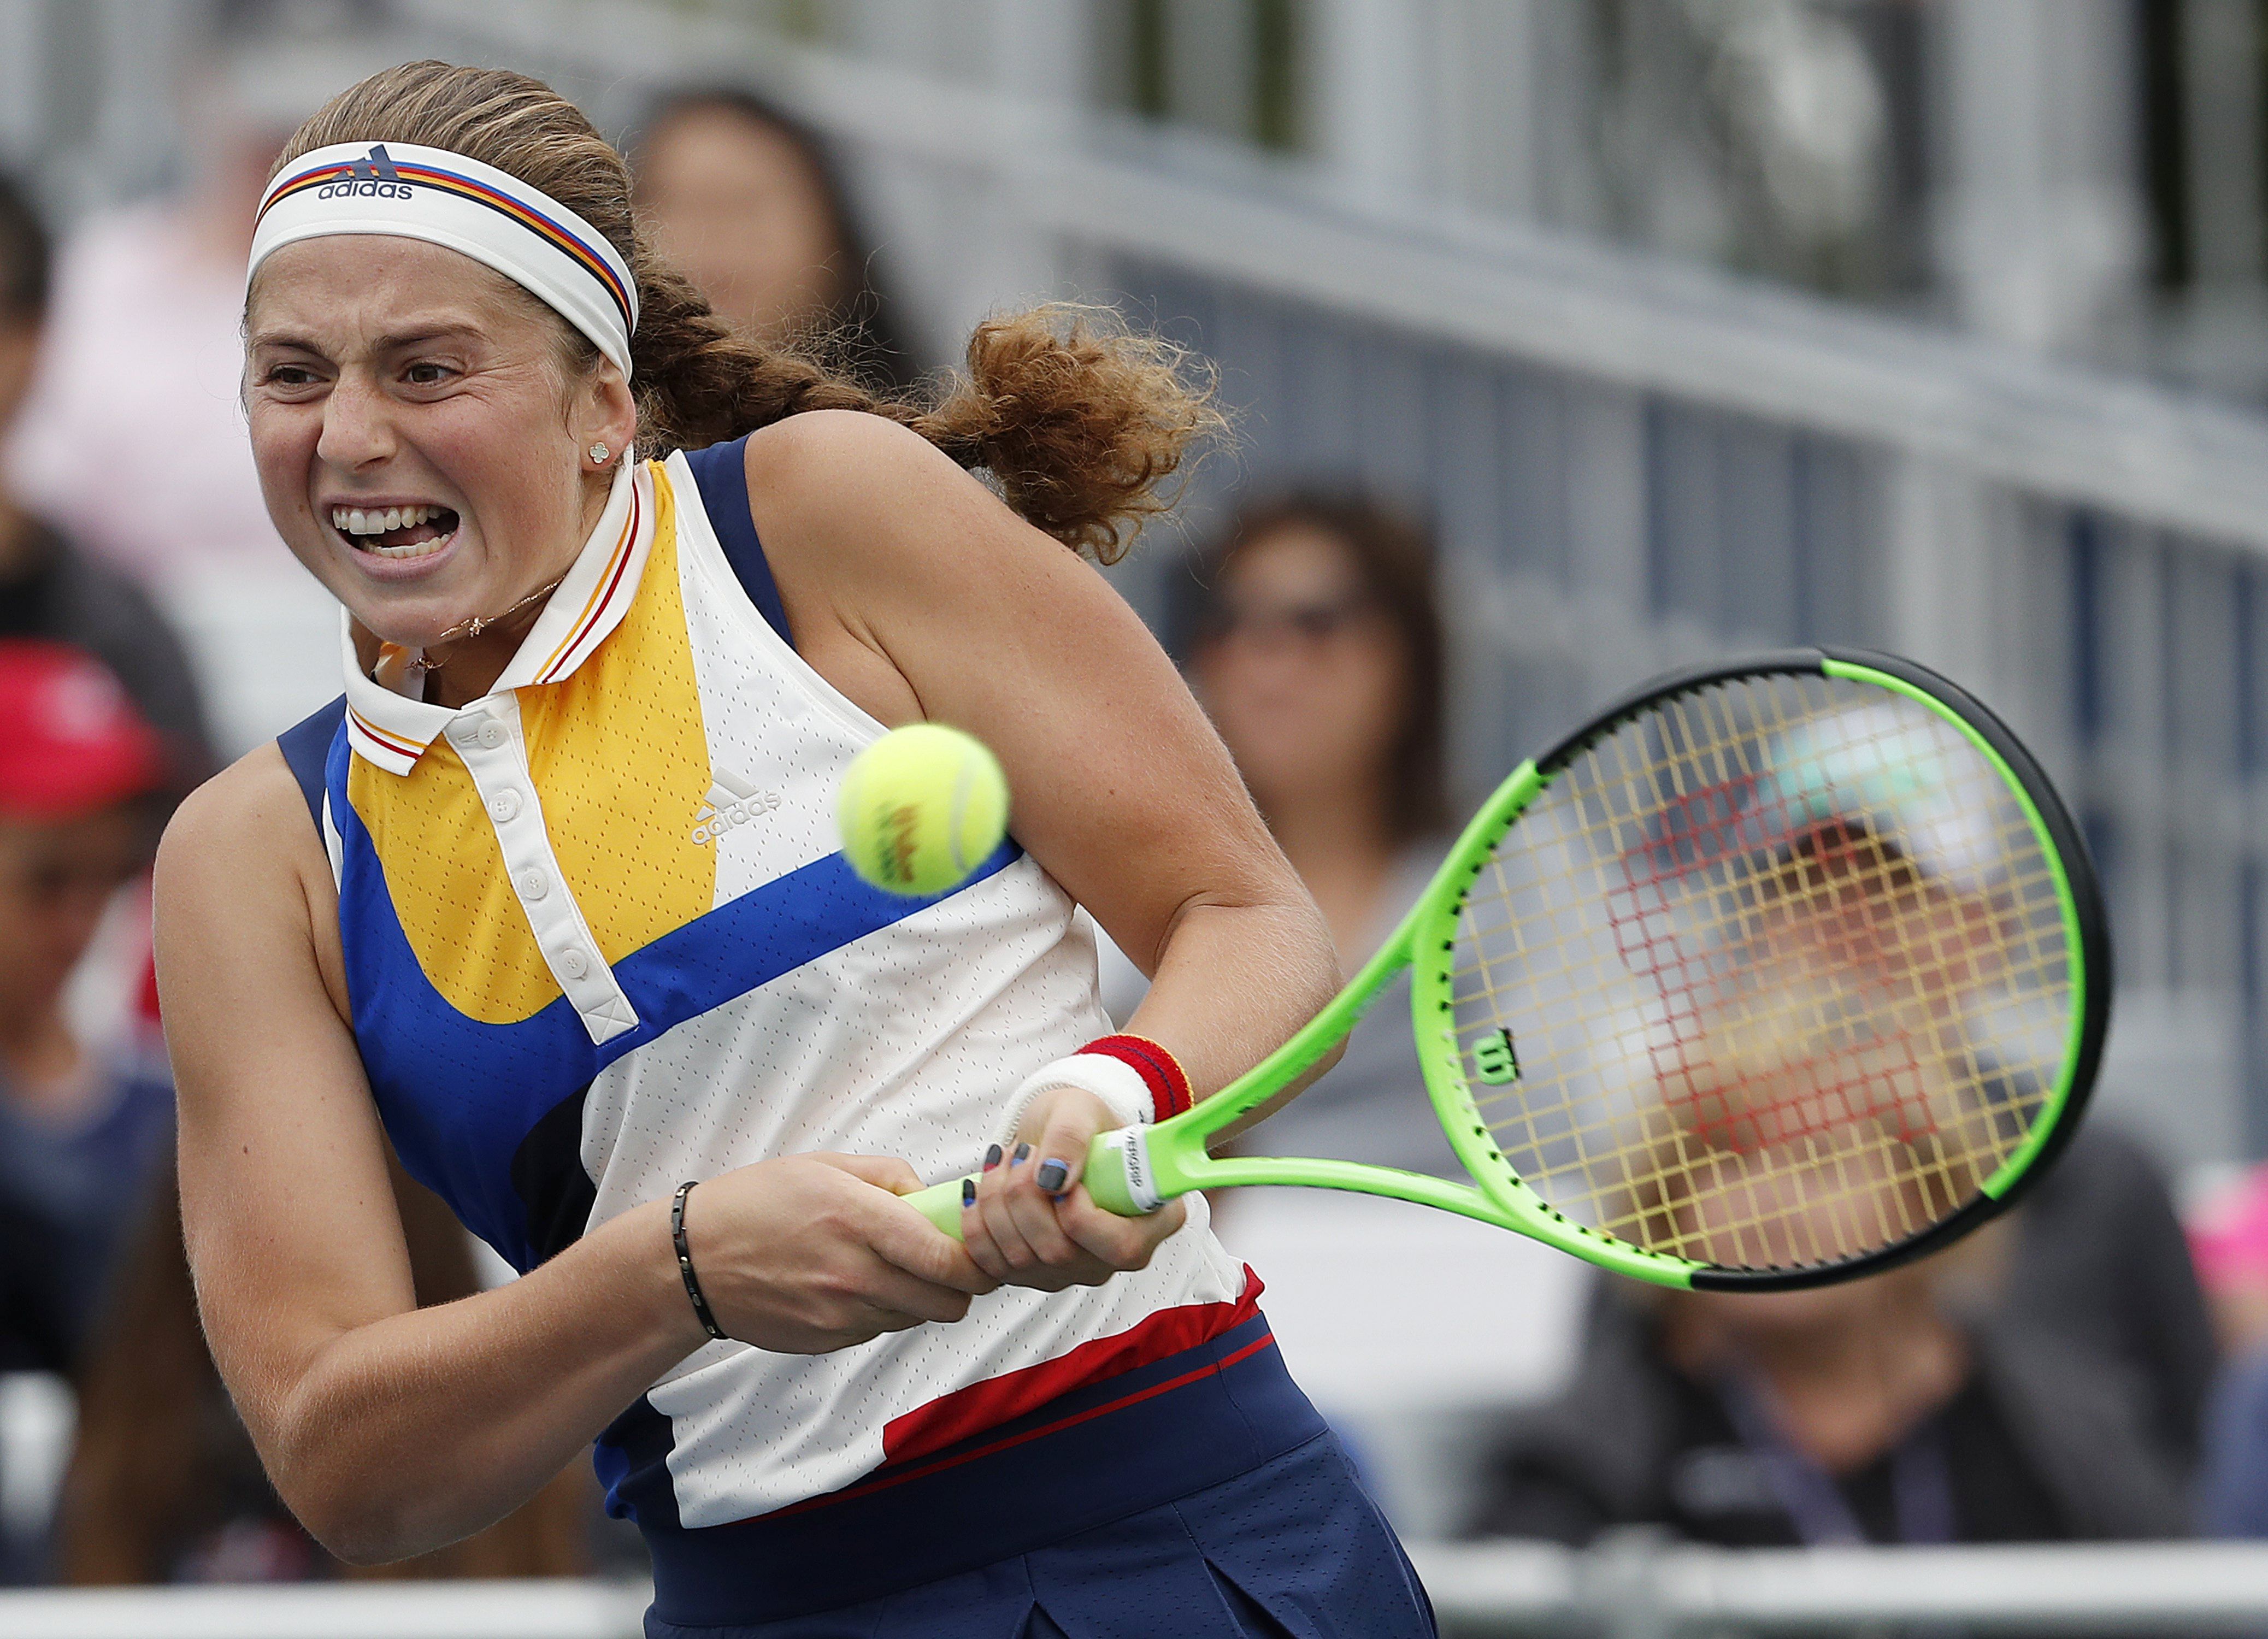 epa06179903 Jelena Ostapenko of Latvia hits a return to Daria Kasatkina of Russia on the sixth day of the US Open Tennis Championships at the USTA National Tennis Center in Flushing Meadows, New York, USA, 02 September 2017. The US Open runs through September 10.  EPA/JOHN G. MABANGLO *** Local Caption *** 53000073